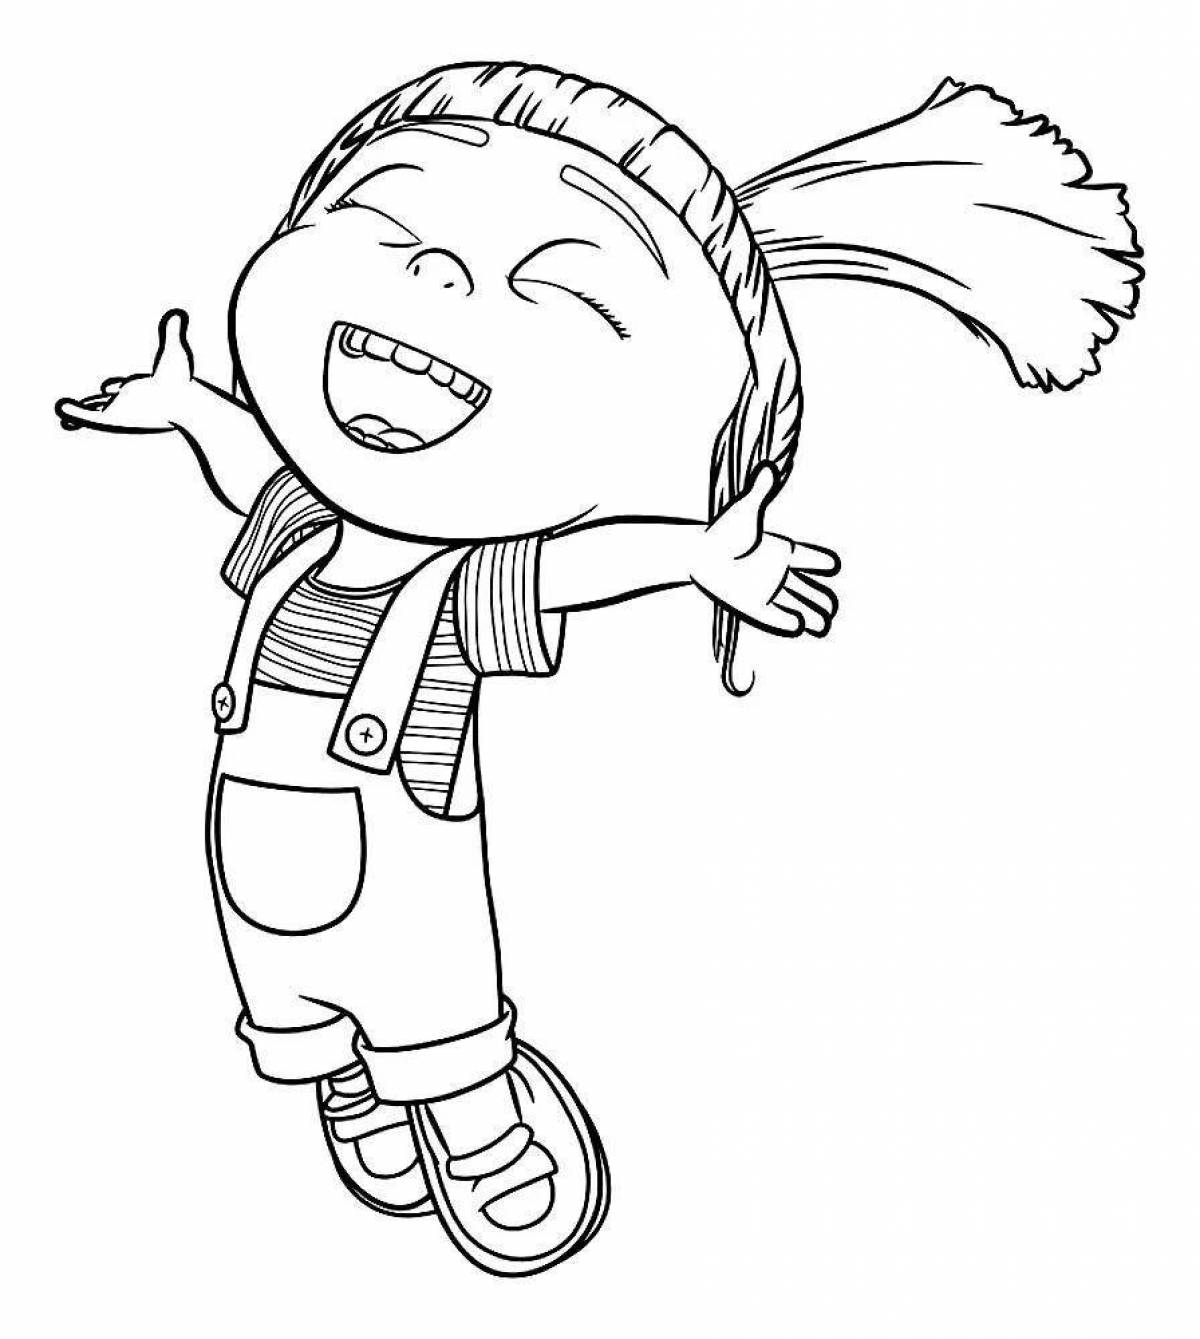 Coloring page charming despicable me 2